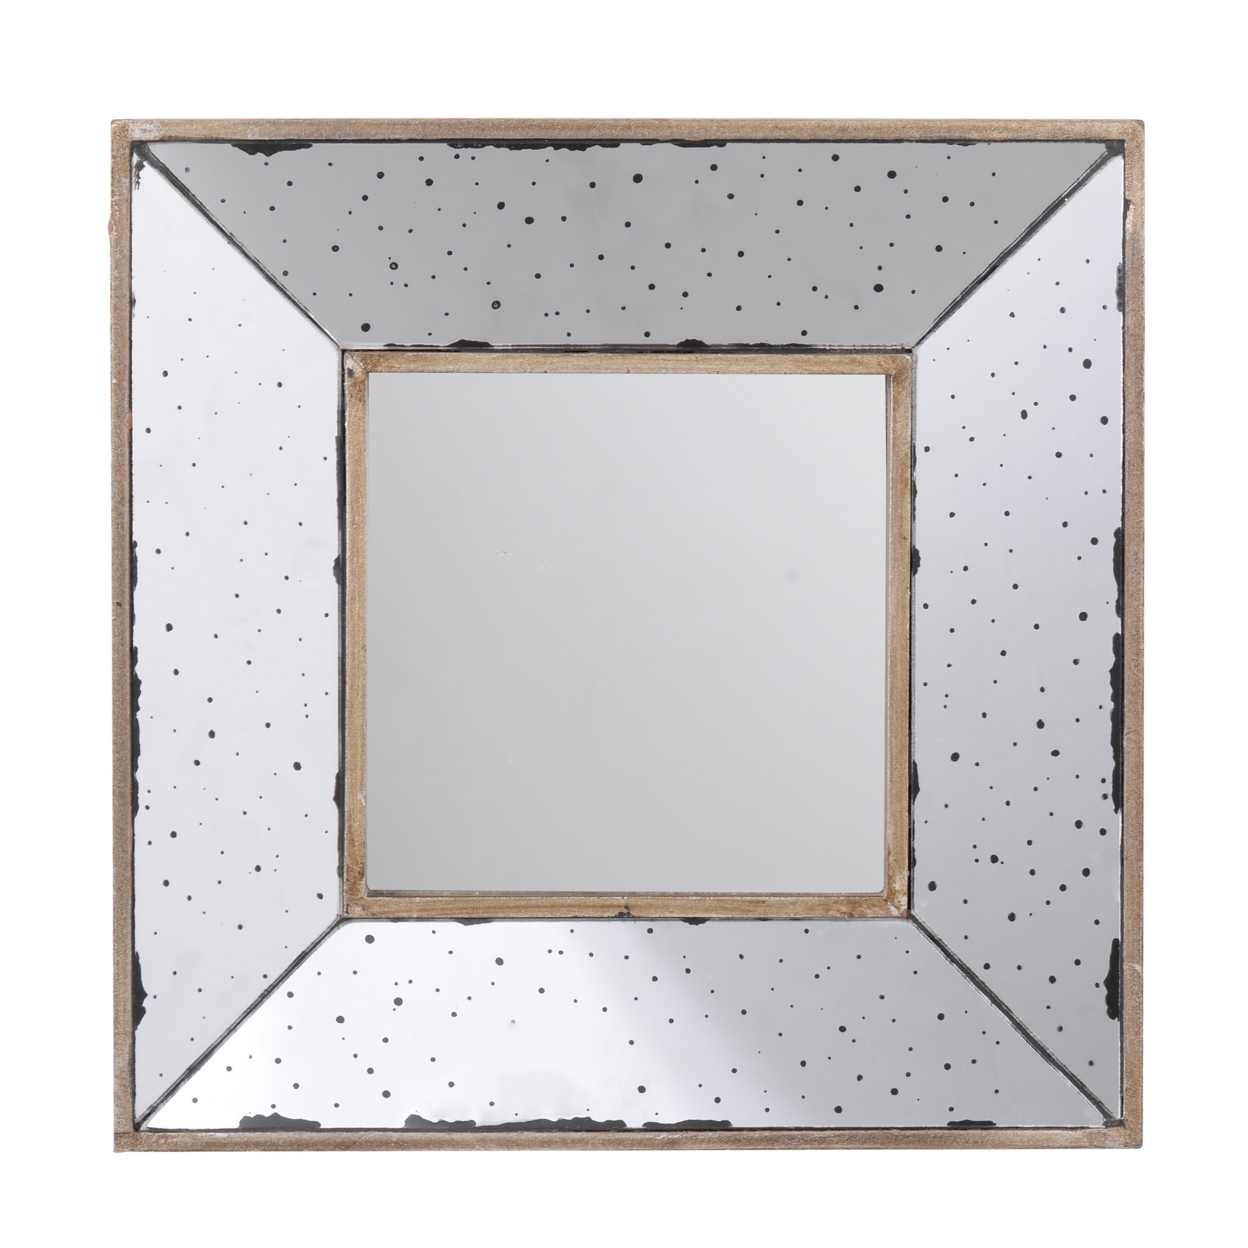 Joe 12 Inch Square Wall Mirror, 3 Dimensional, Speckled Off White And Brown- Saltoro Sherpi